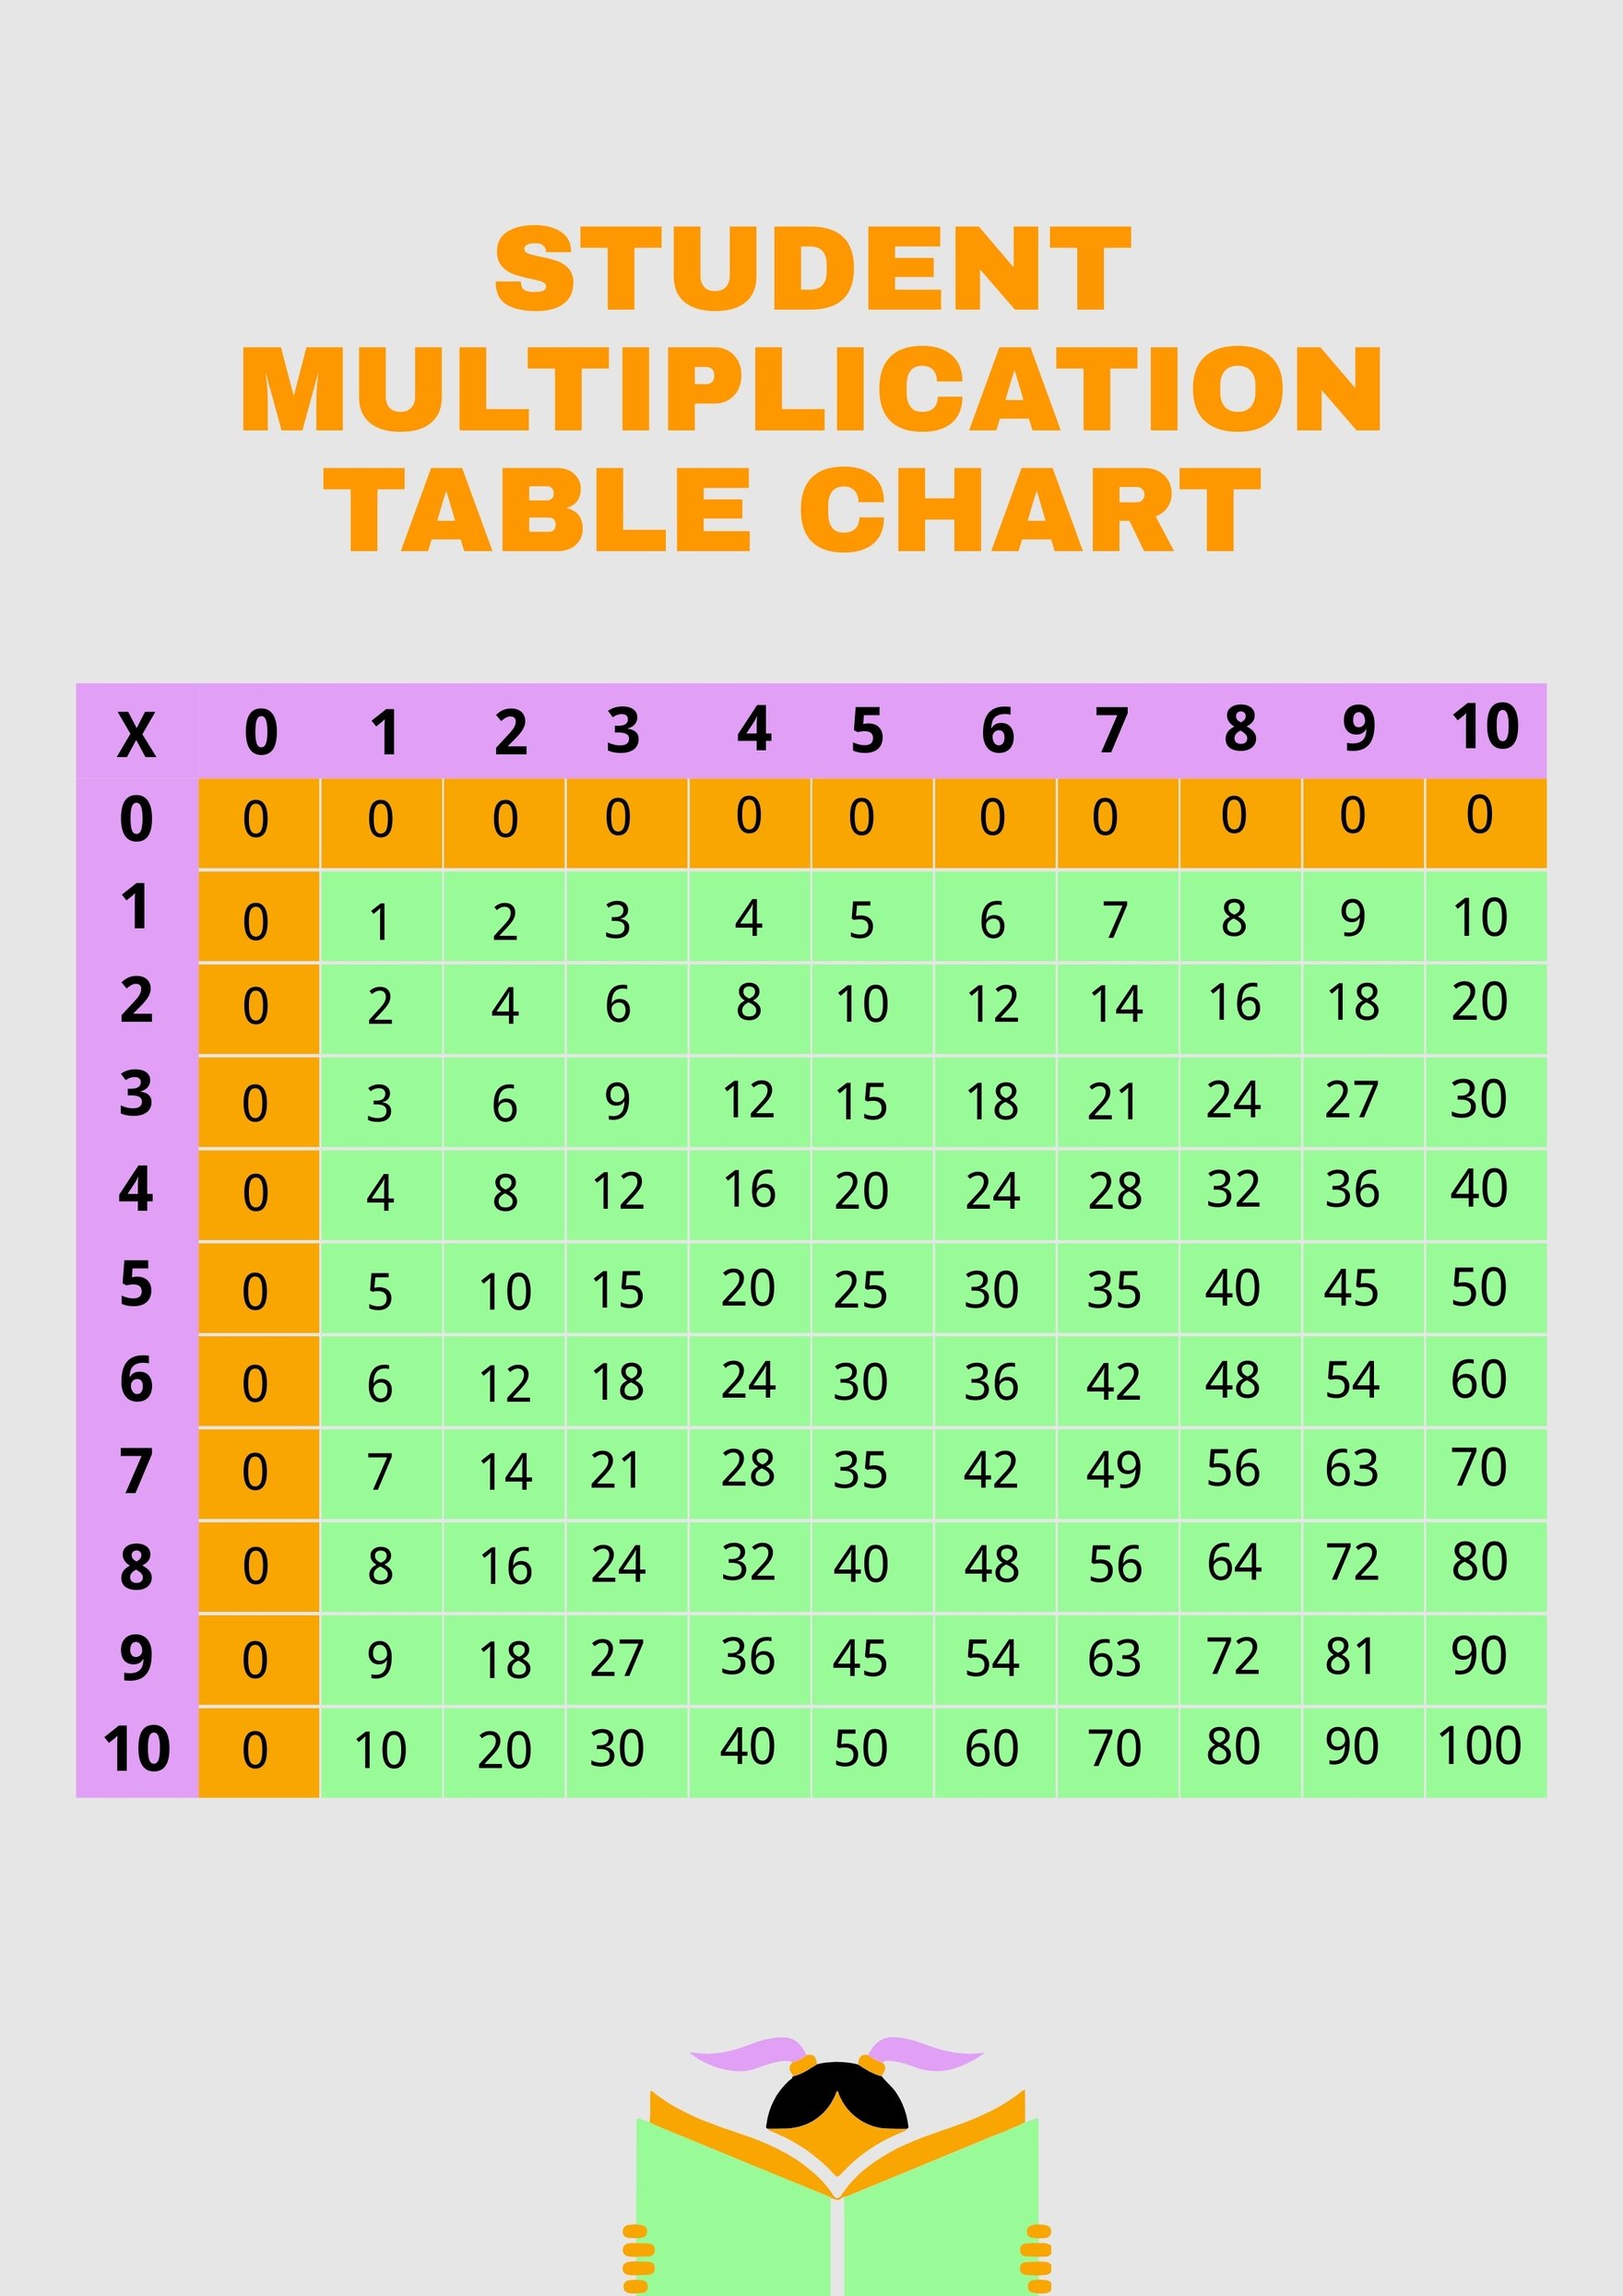 Free Multiplication Table Chart Numbers 1 To 10 Download in PDF